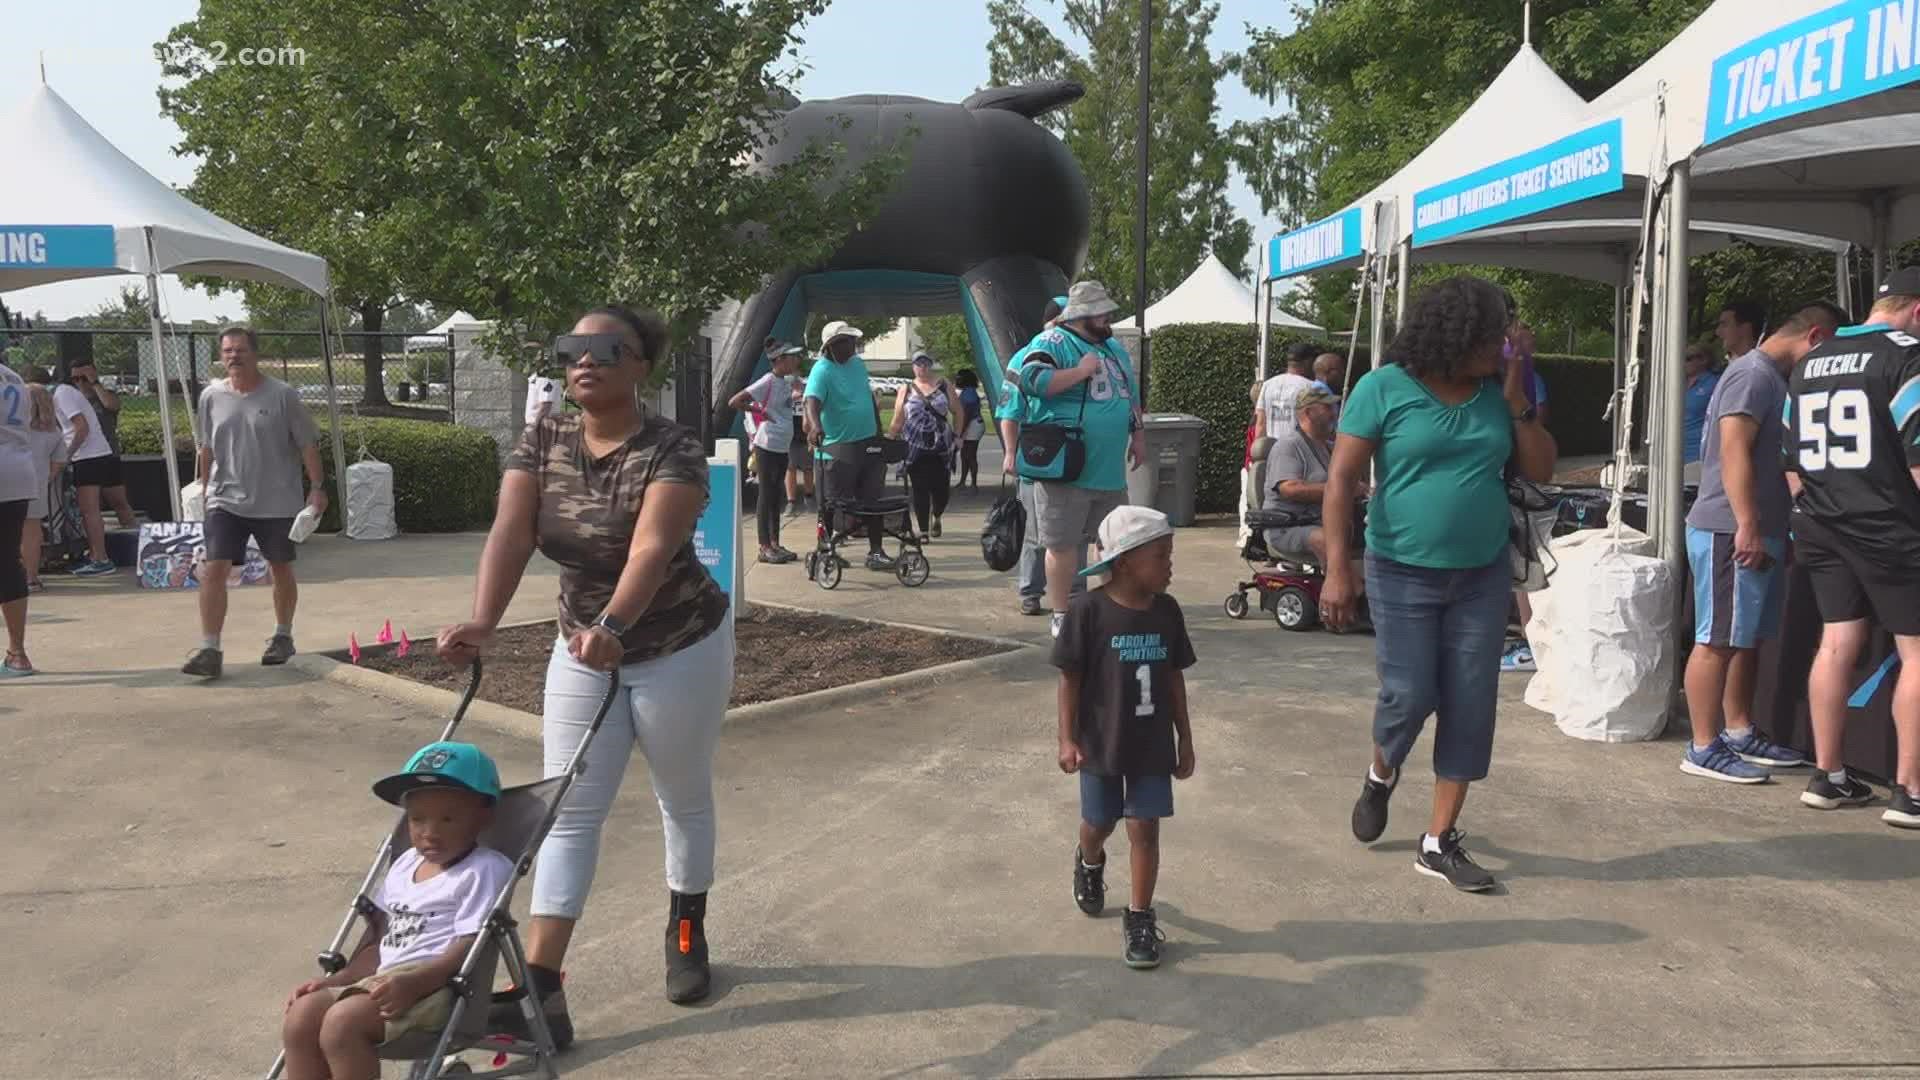 Panthers fans are getting their first glimpse at the team during training camp at Wofford College in Spartanburg, South Carolina.